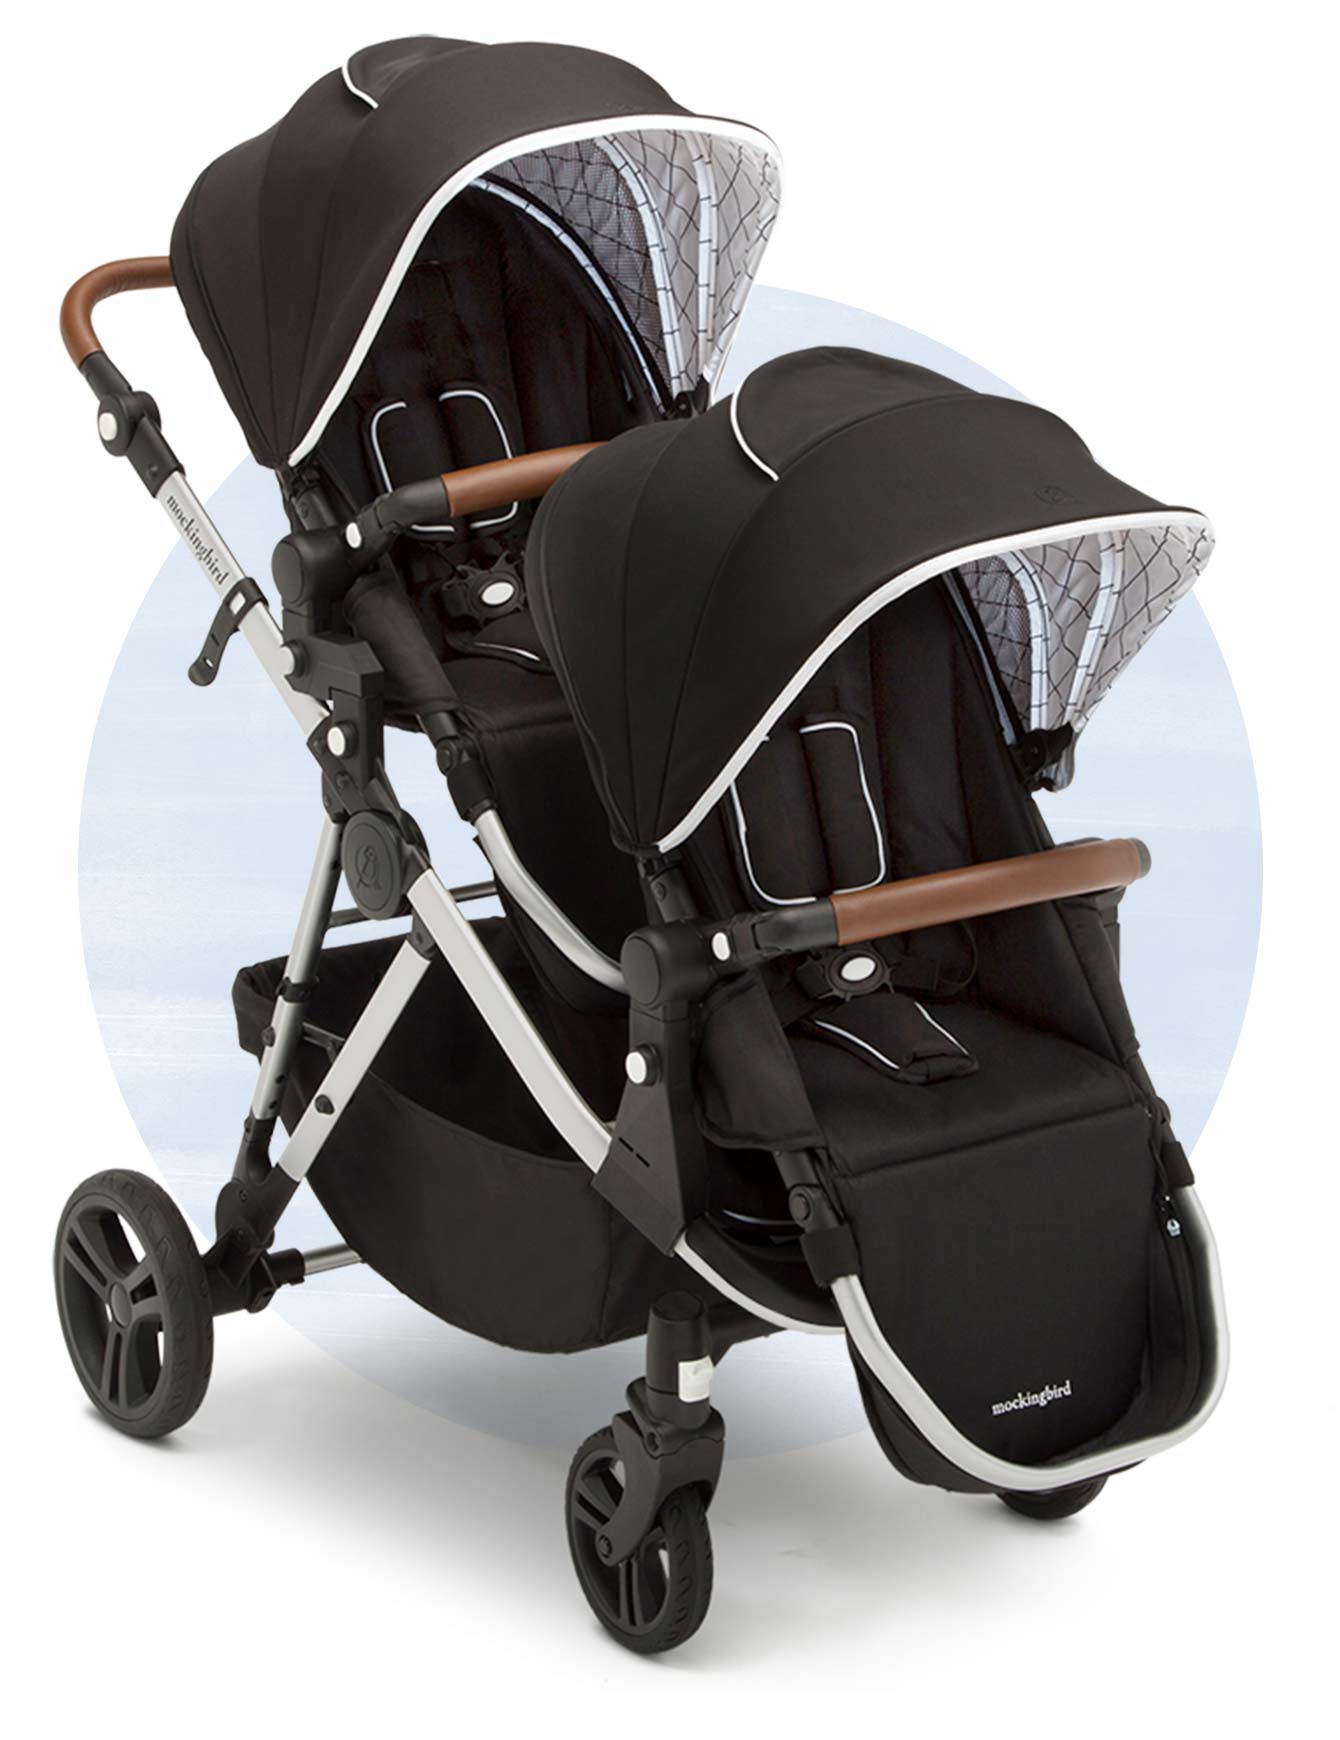 A double baby stroller with black canopies, spacious seating, and a modern design on a white background.